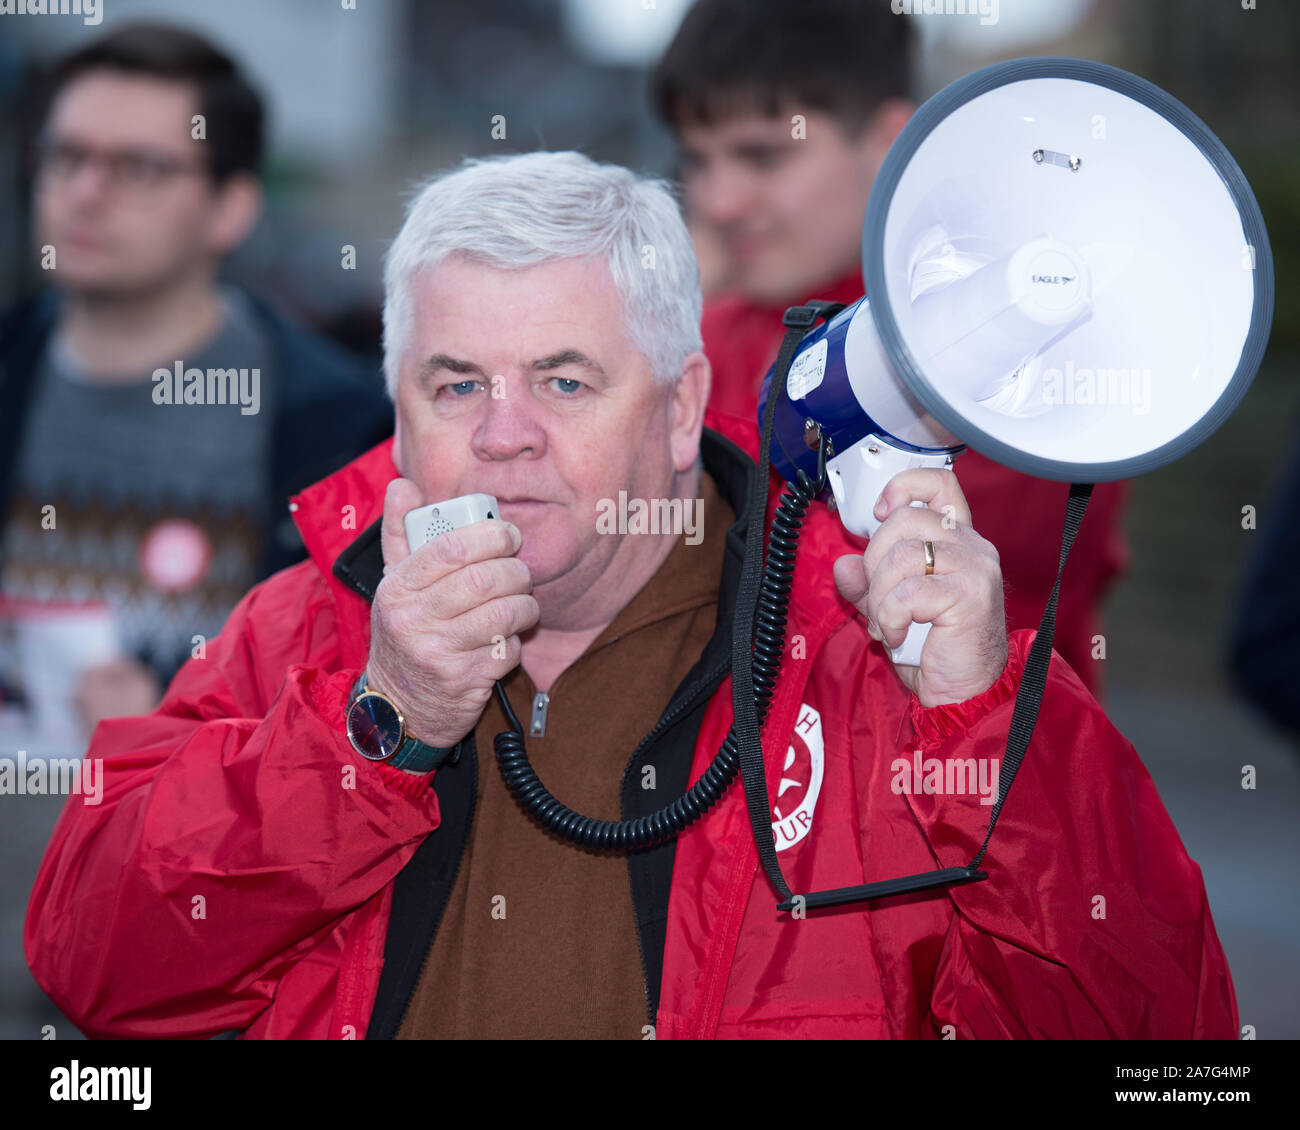 Coatbridge, UK. 2 November 2019. Poctured: Hugh Gaffney MP for Coatbridge, Chryston and Bellshill. Scottish Labour Photo Op in Coatbridge as things heat up for the snap UK Parliamentary General Election on 12th December 2019. Credit: Colin Fisher/Alamy Live News Stock Photo